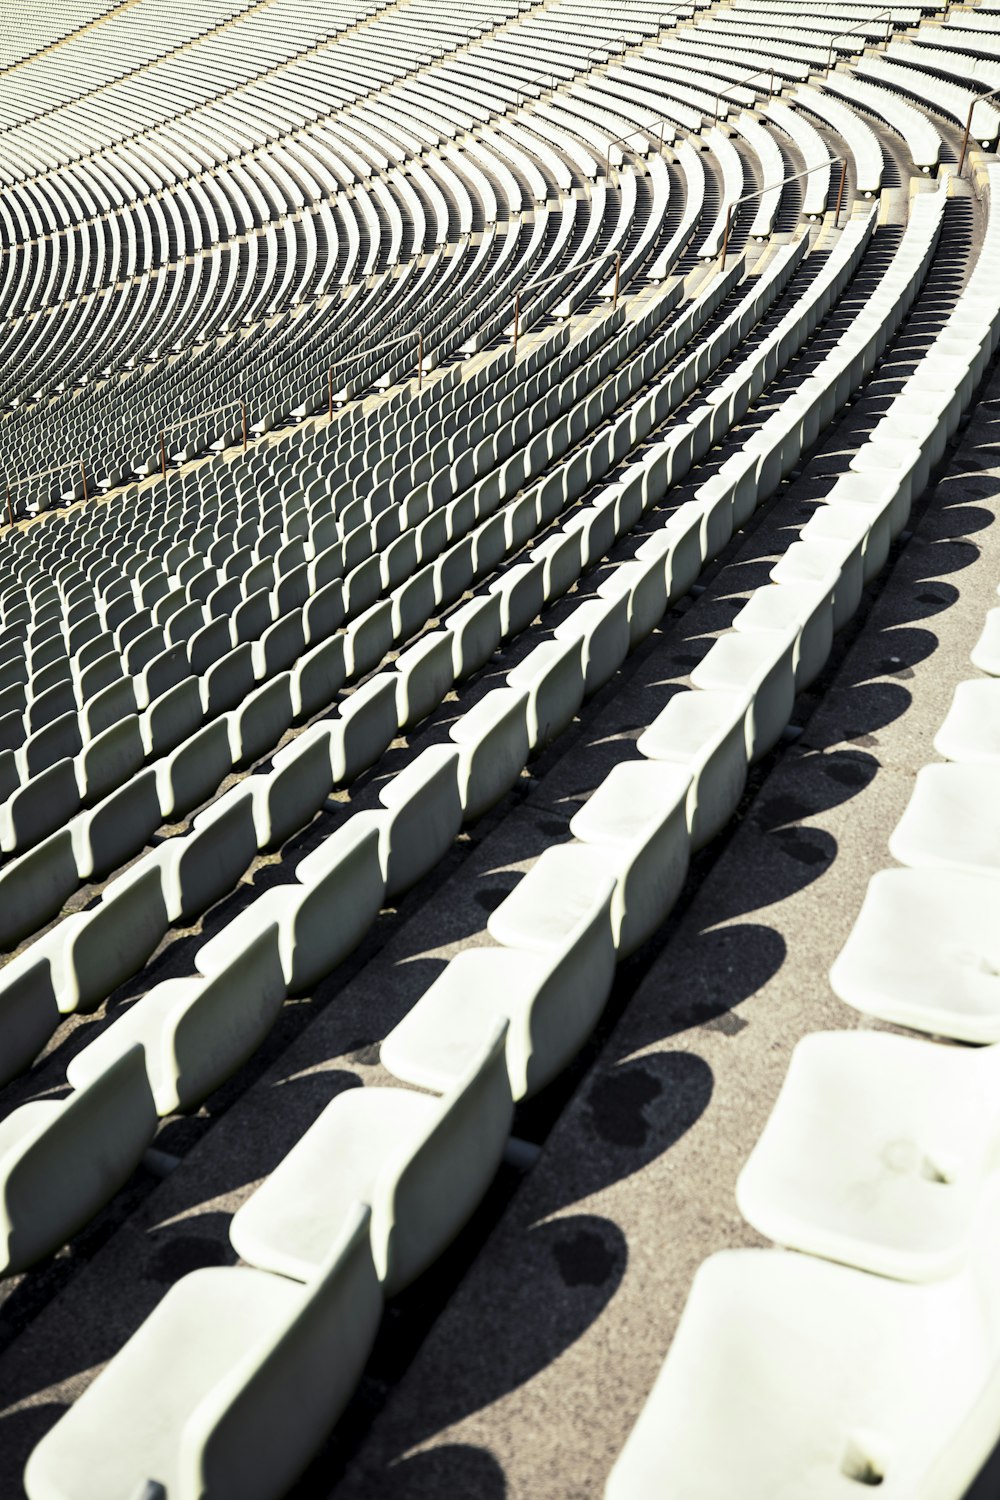 rows of white seats in a stadium or arena